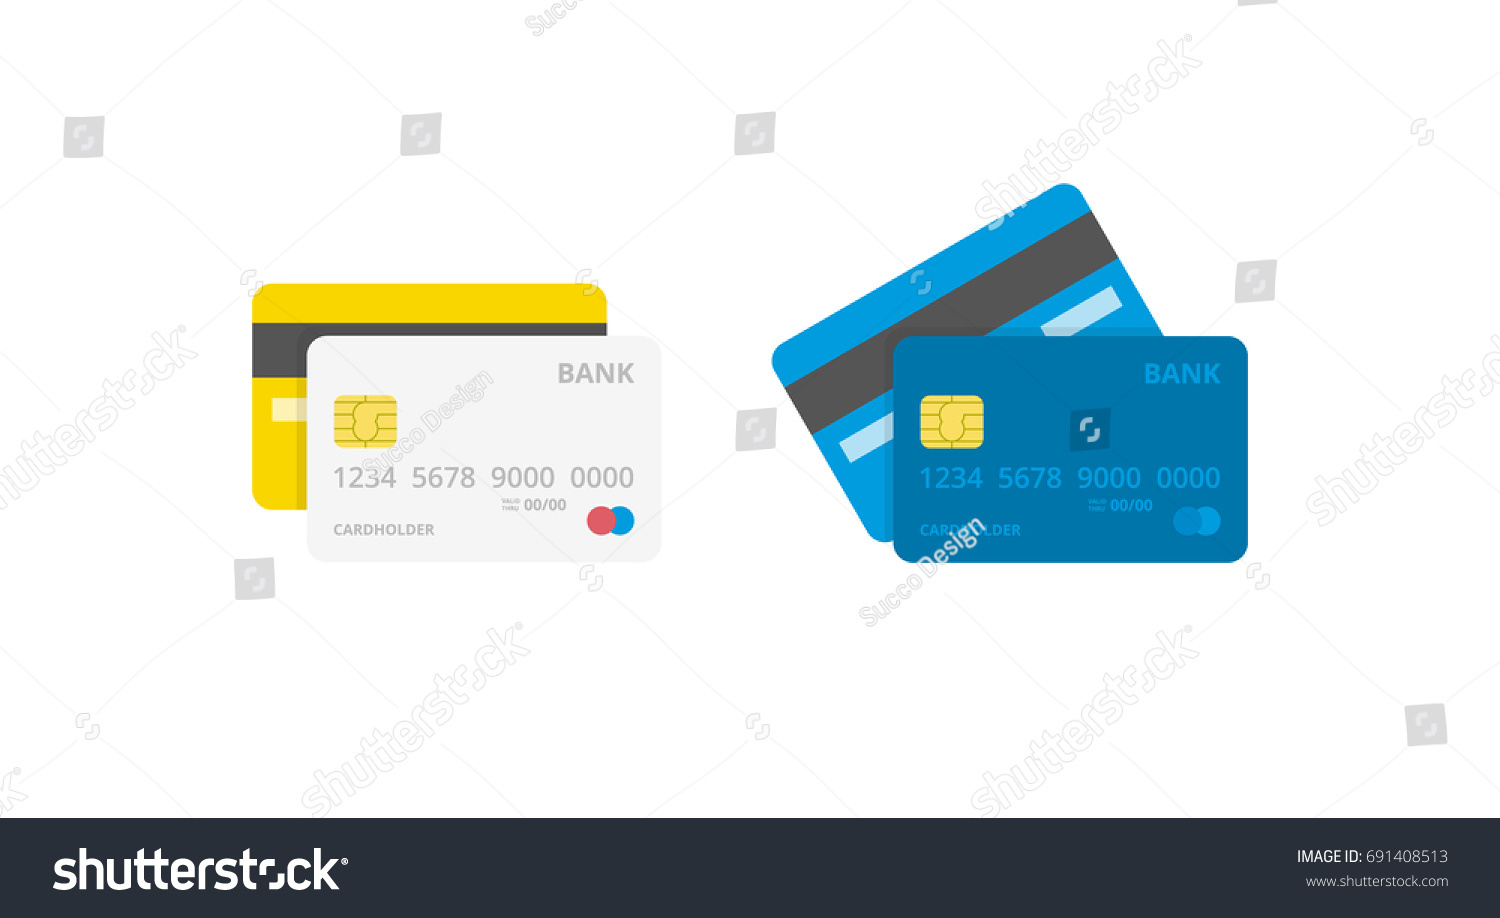 Credit Cards illustrations. Front and Back views. #691408513